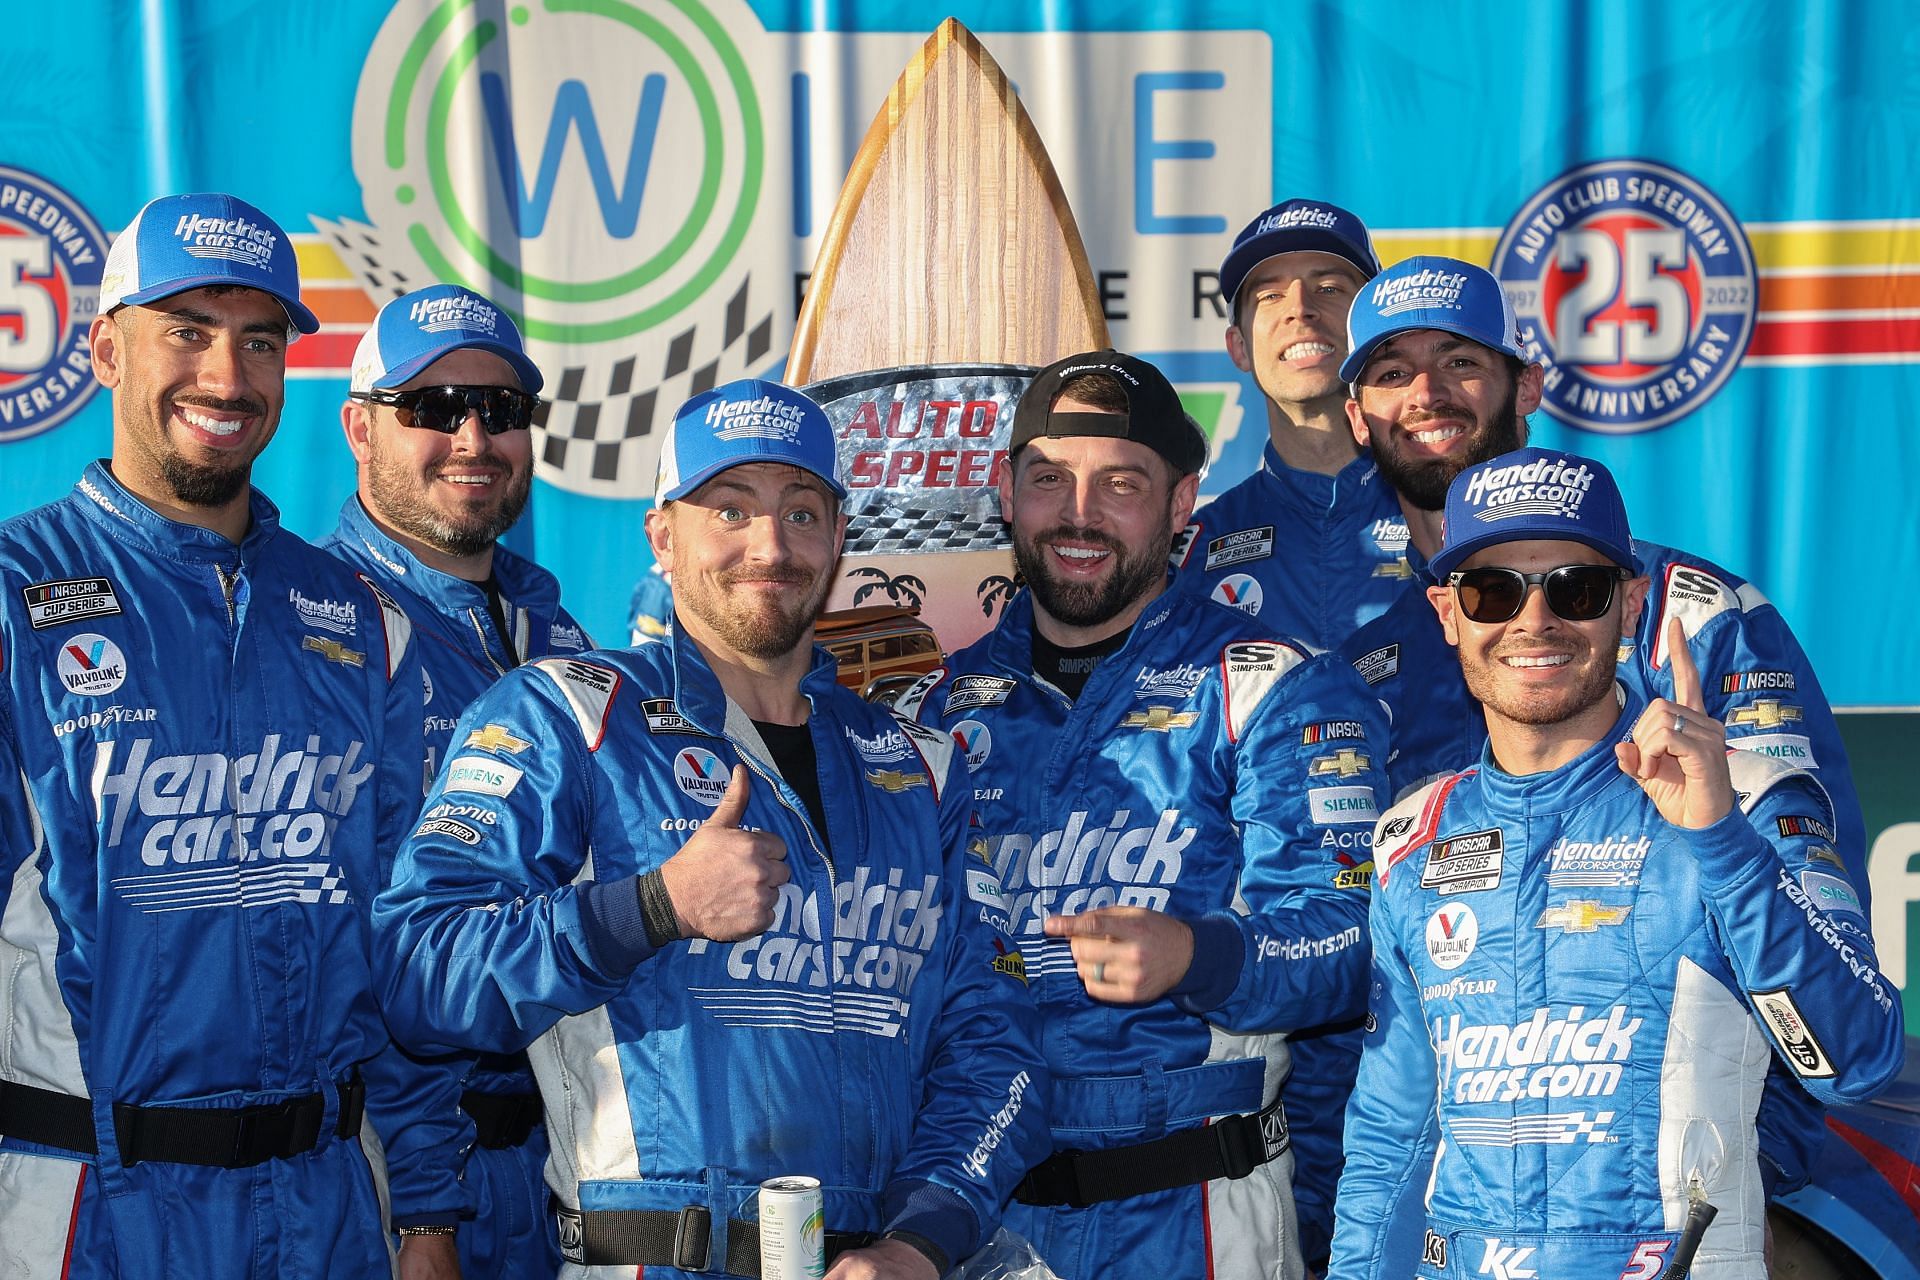 Kyle Larson and his team celebrate in the Ruoff Mortgage victory lane after winning Wise Power 400 at Auto Club Speedway